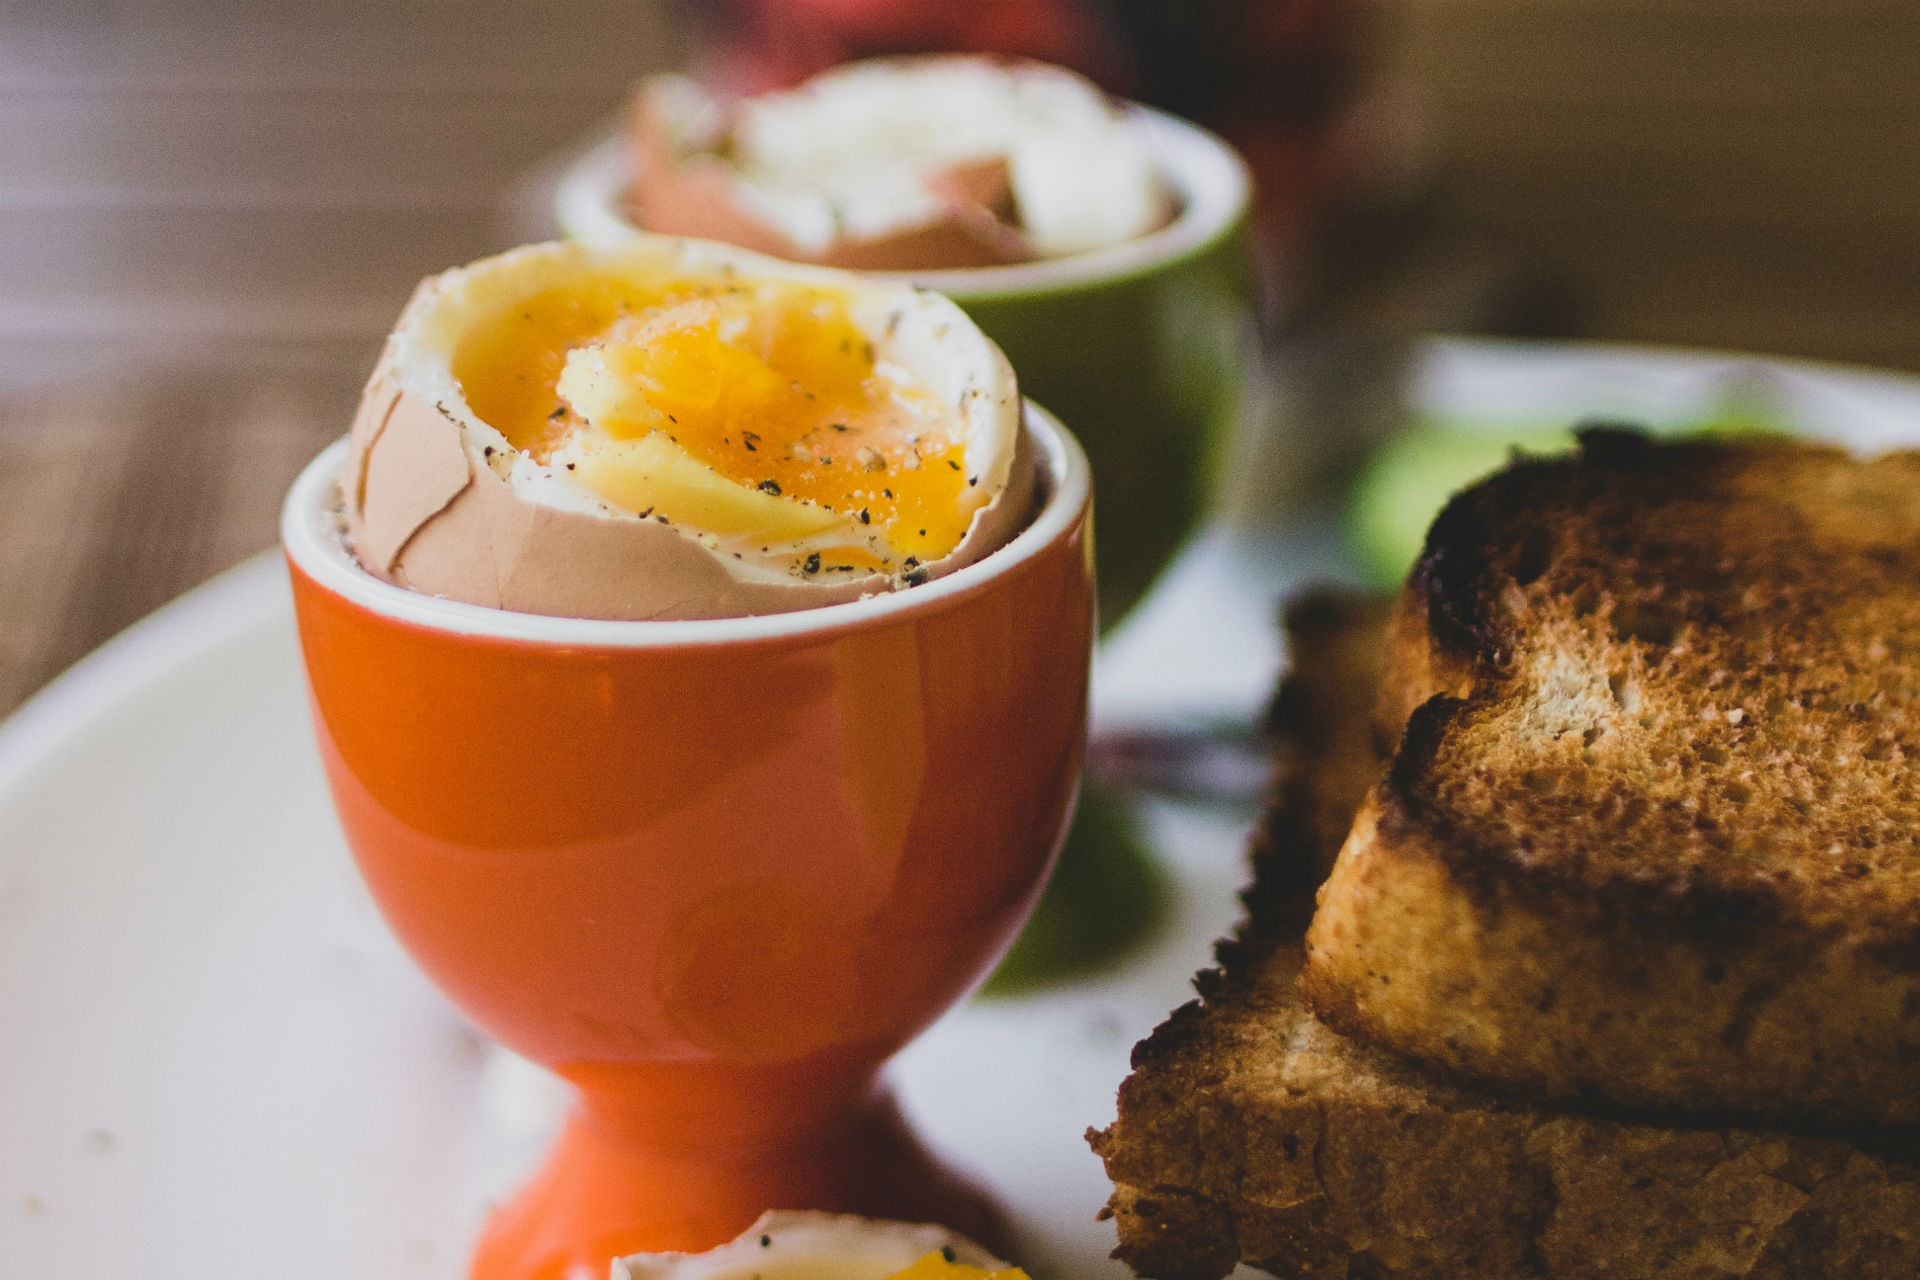 soft boiled eggs and toast on a table